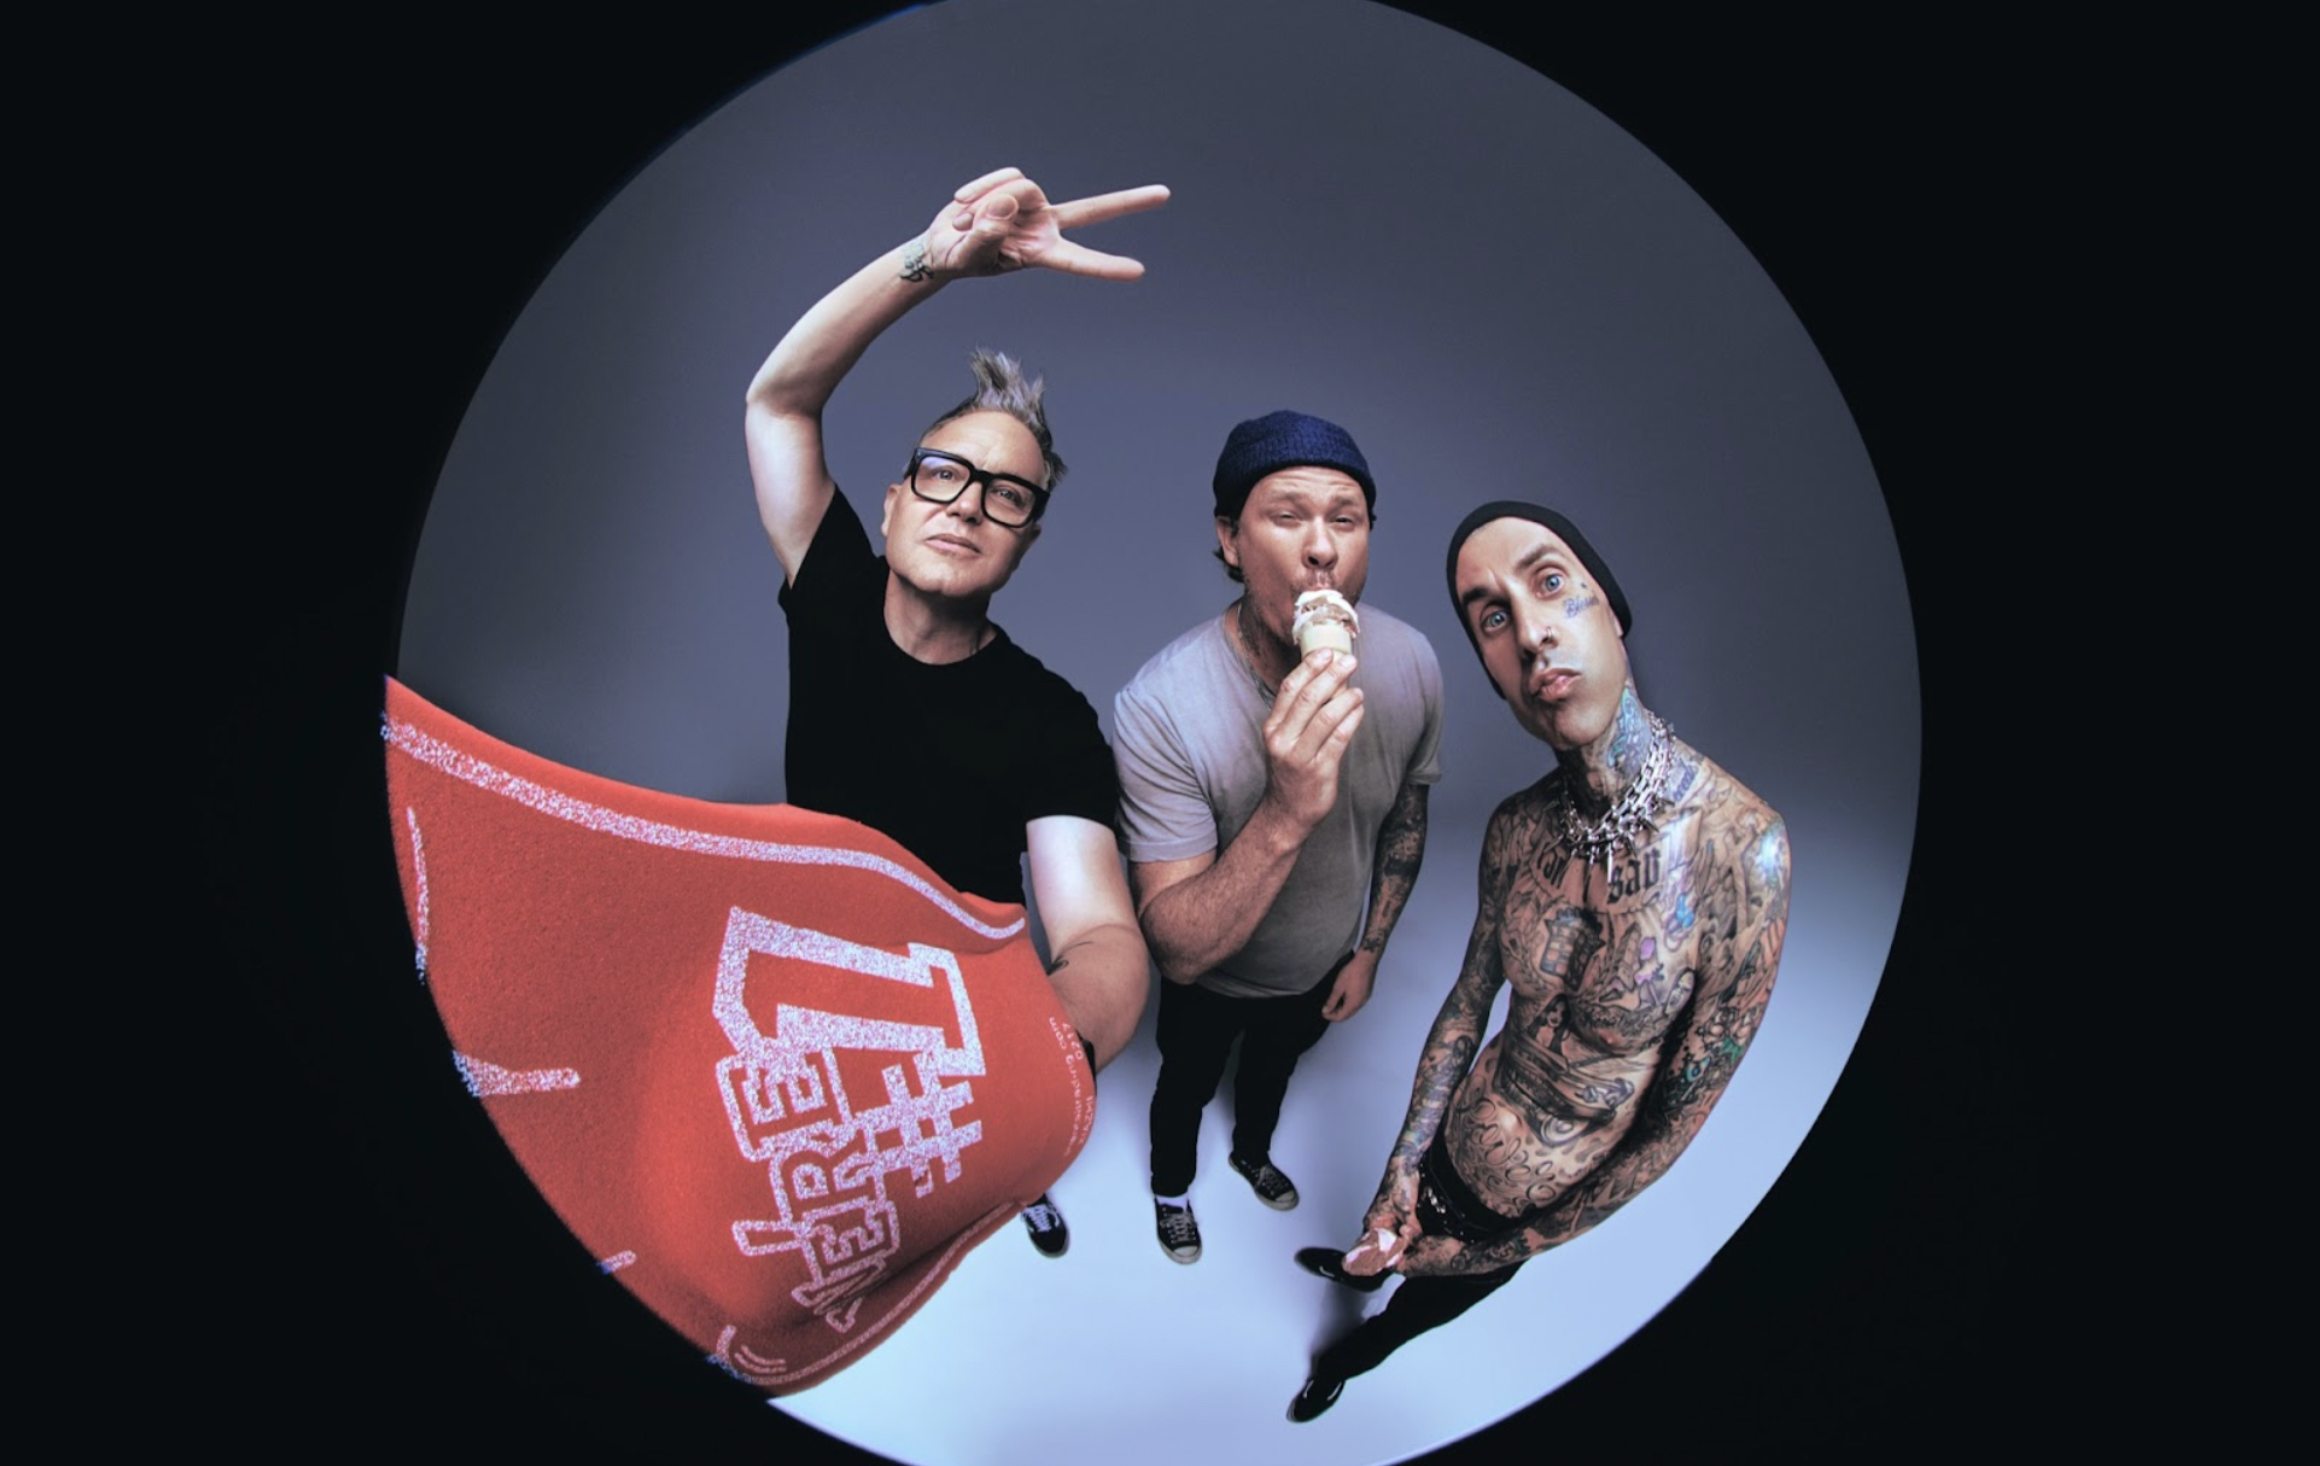 Blink-182 reunite with Tom Delonge and announce new single ‘Edging’ and biggest tour ever!